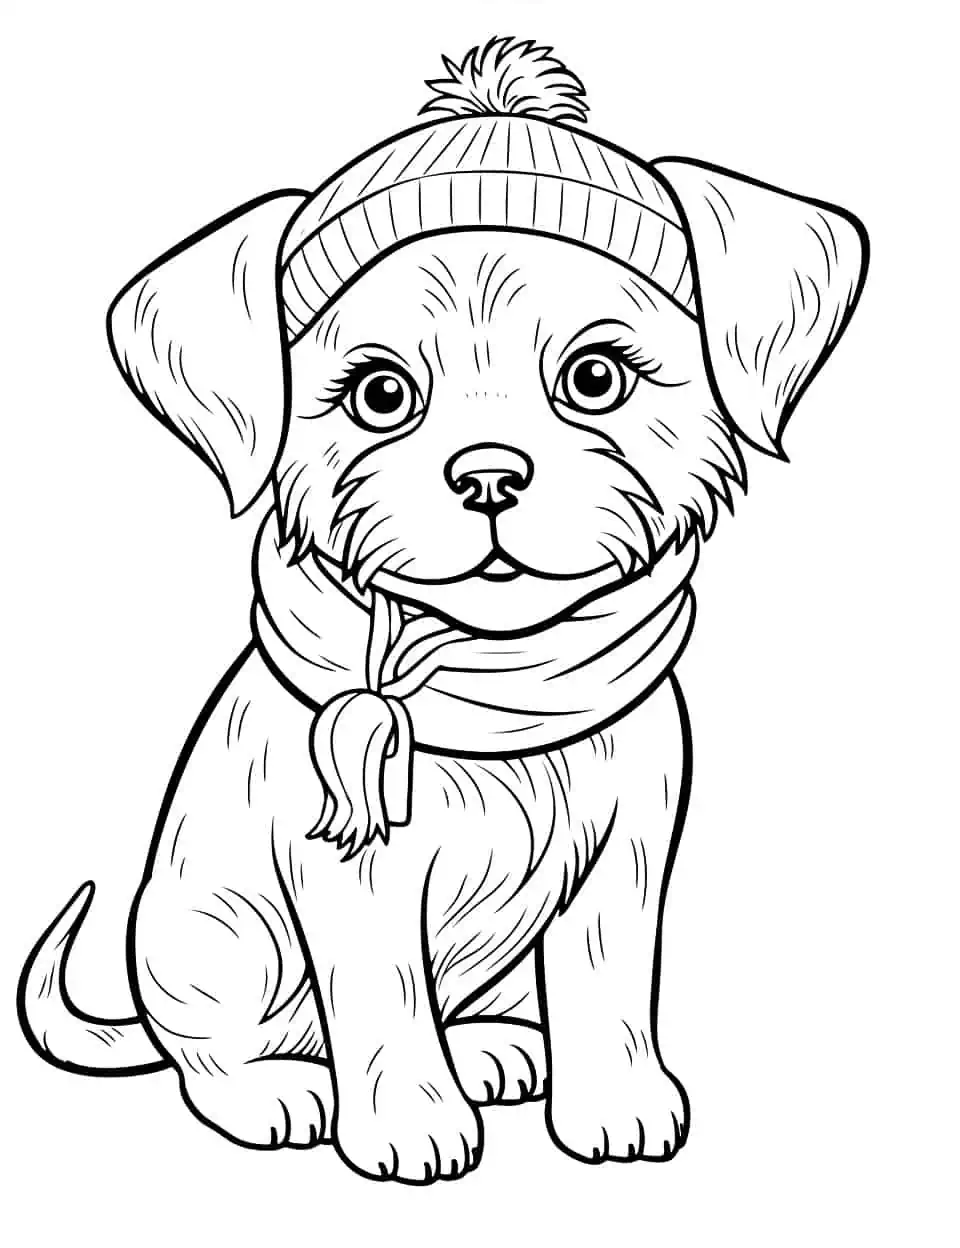 Yorkie in a Knit Hat Coloring Page - A fashionable Yorkie in a colorful knit hat and scarf for a winter theme.